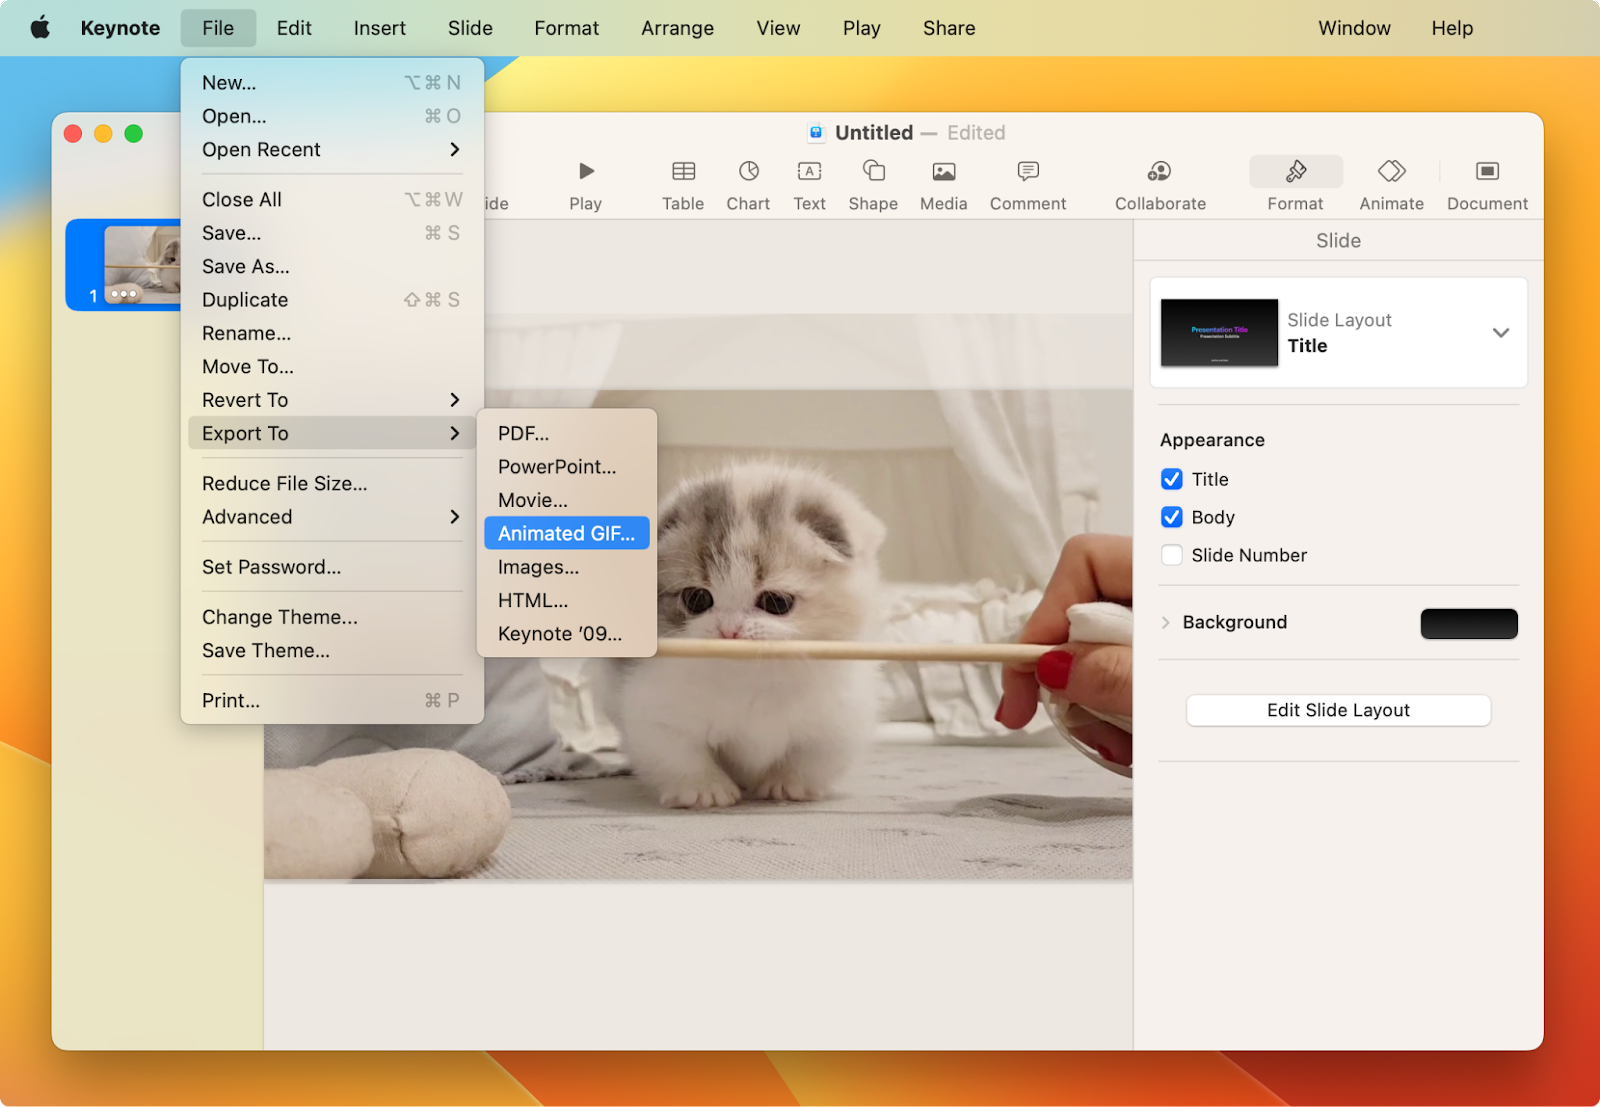 How to convert a video to GIF on Mac